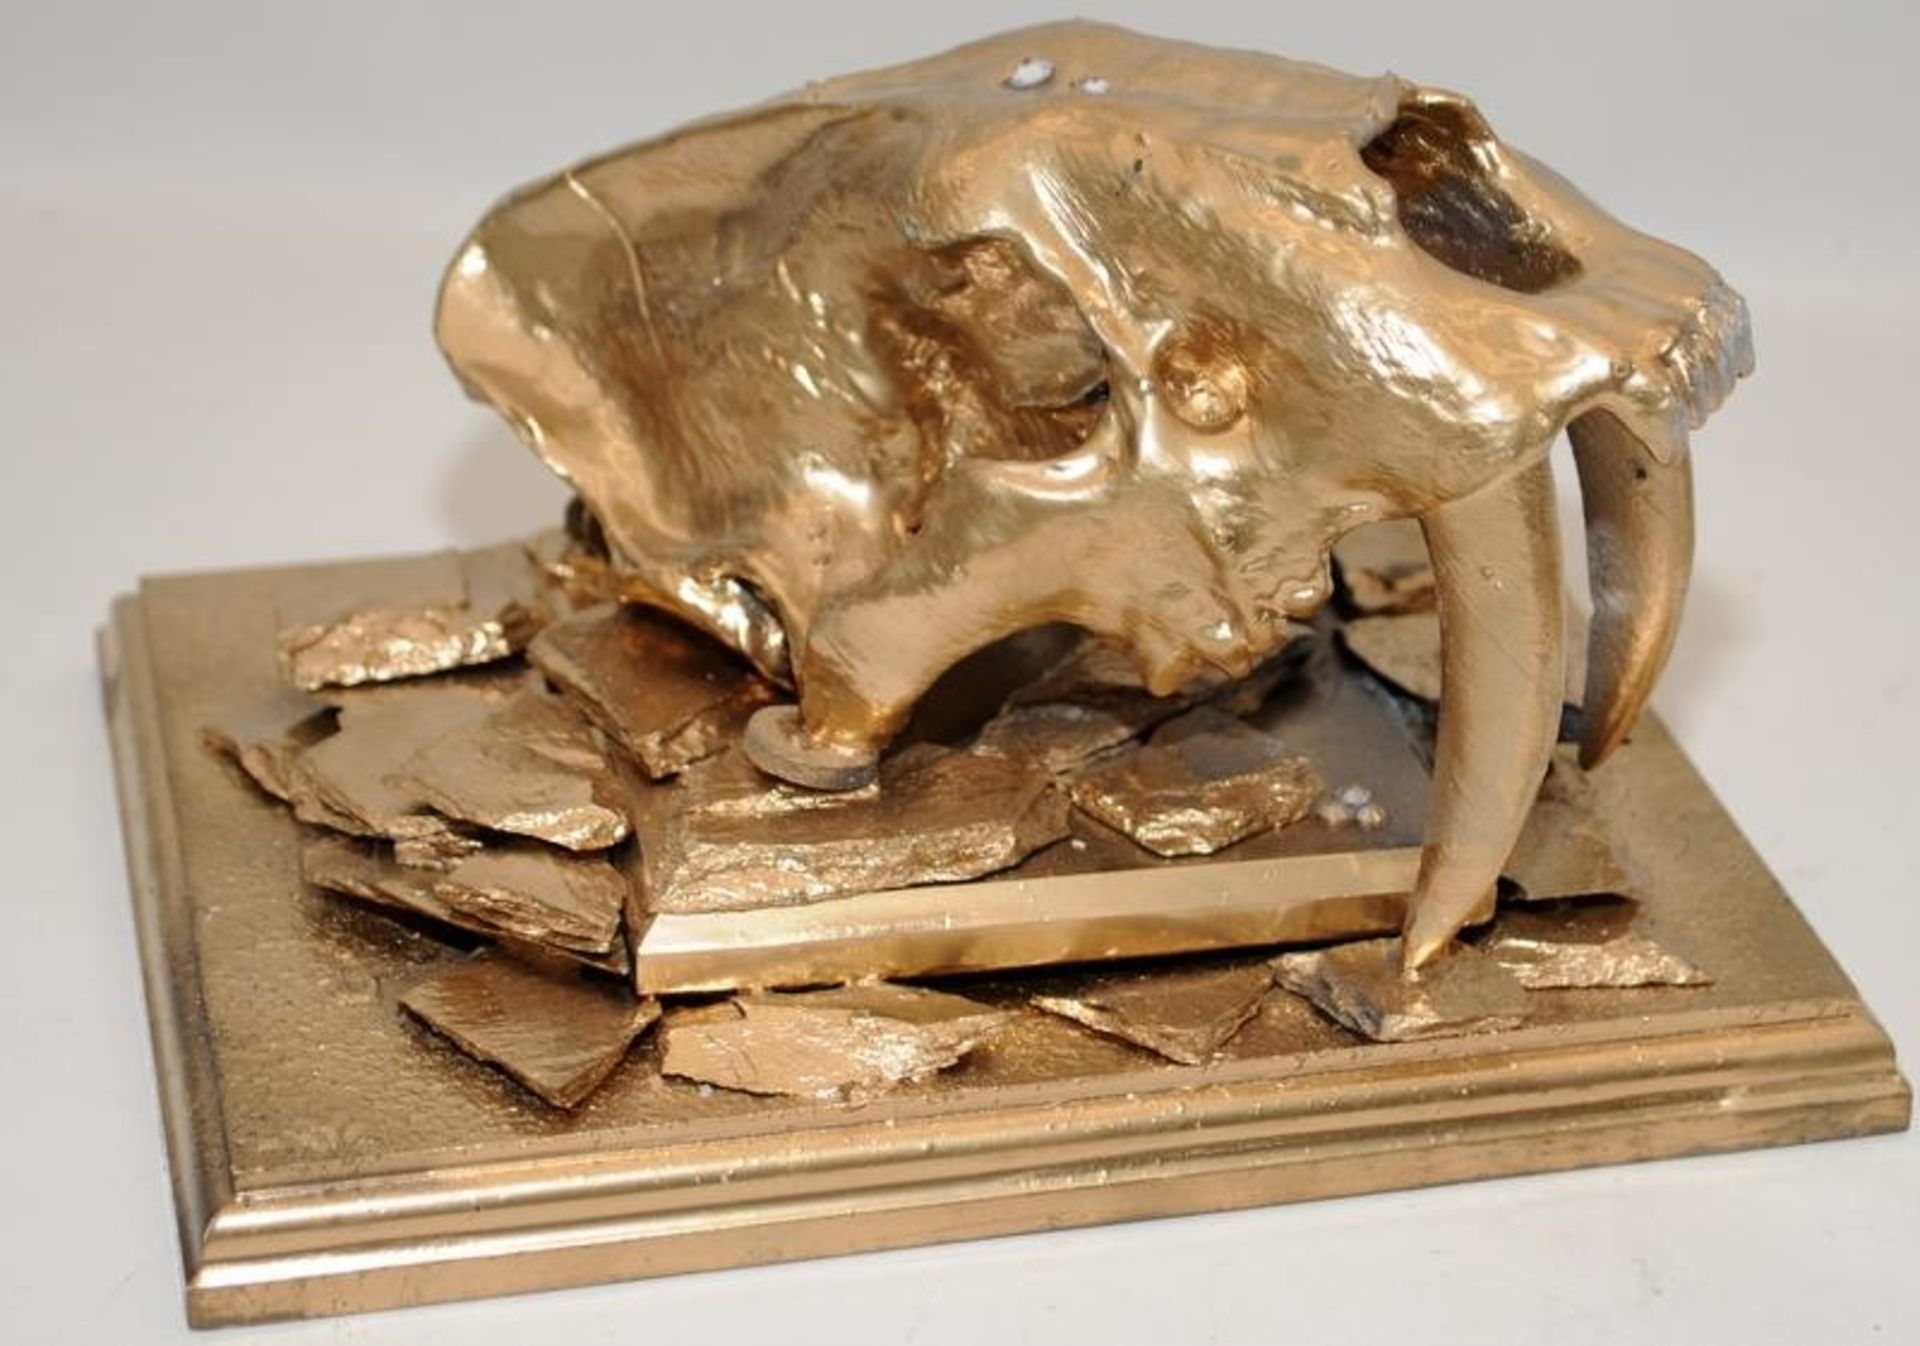 Contemporary art sculpture. Model Sabre Toothed Tiger skull painted gold and mounted. Can be